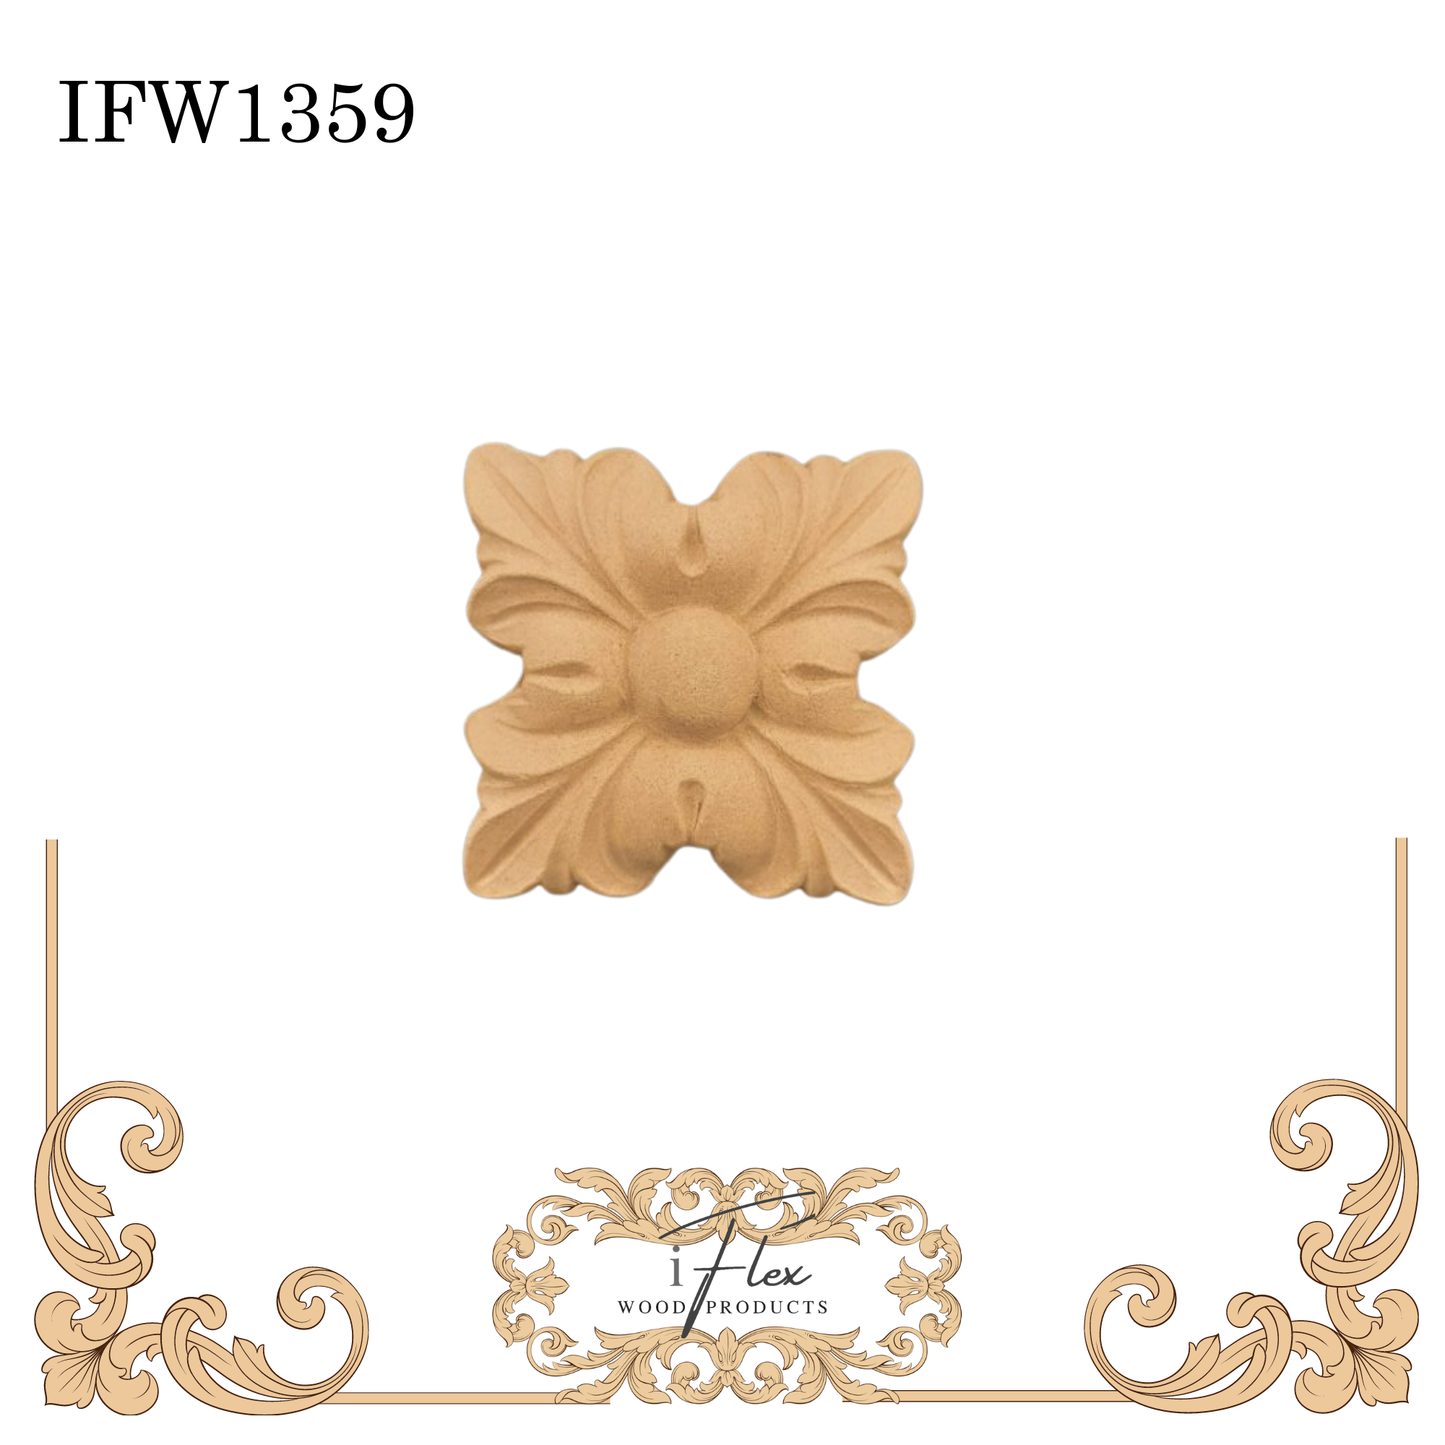 IFW 1359 iFlex Wood Products, bendable mouldings, flexible, wooden appliques, flower square centerpiece